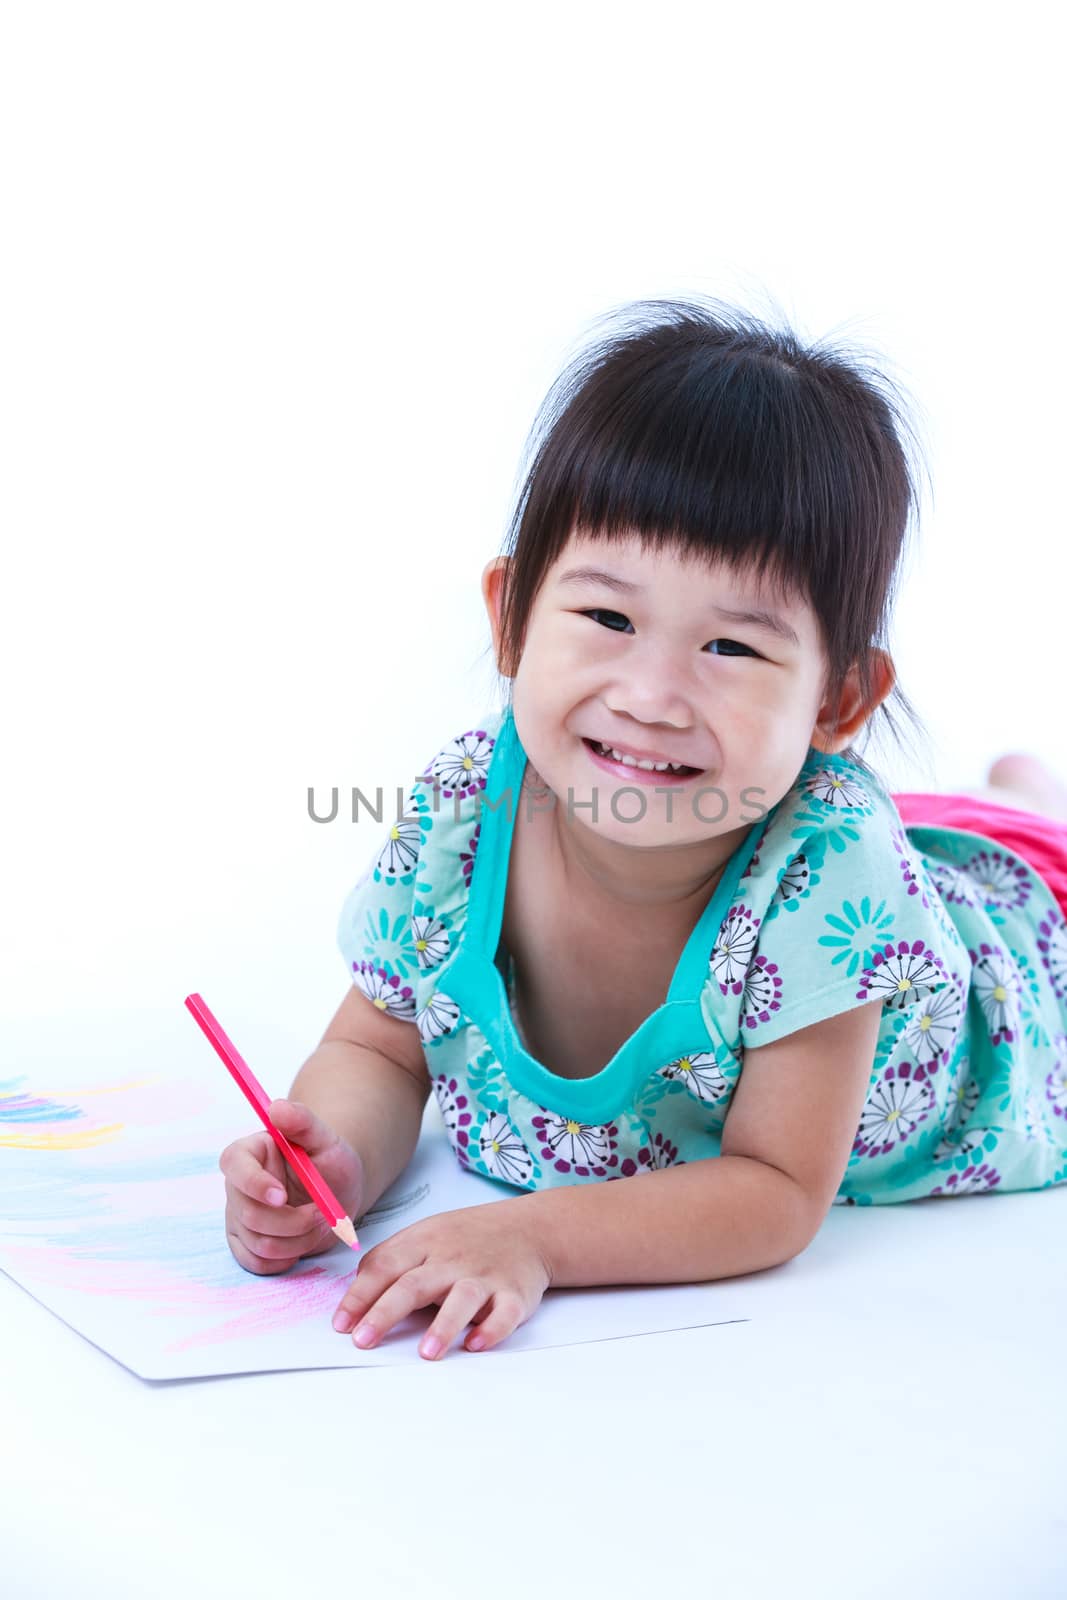 Pretty asian girl lie on the floor looking at camera and smiling. Concepts of creativity and education, strengthen the imagination of child. Studio shot. On white background.